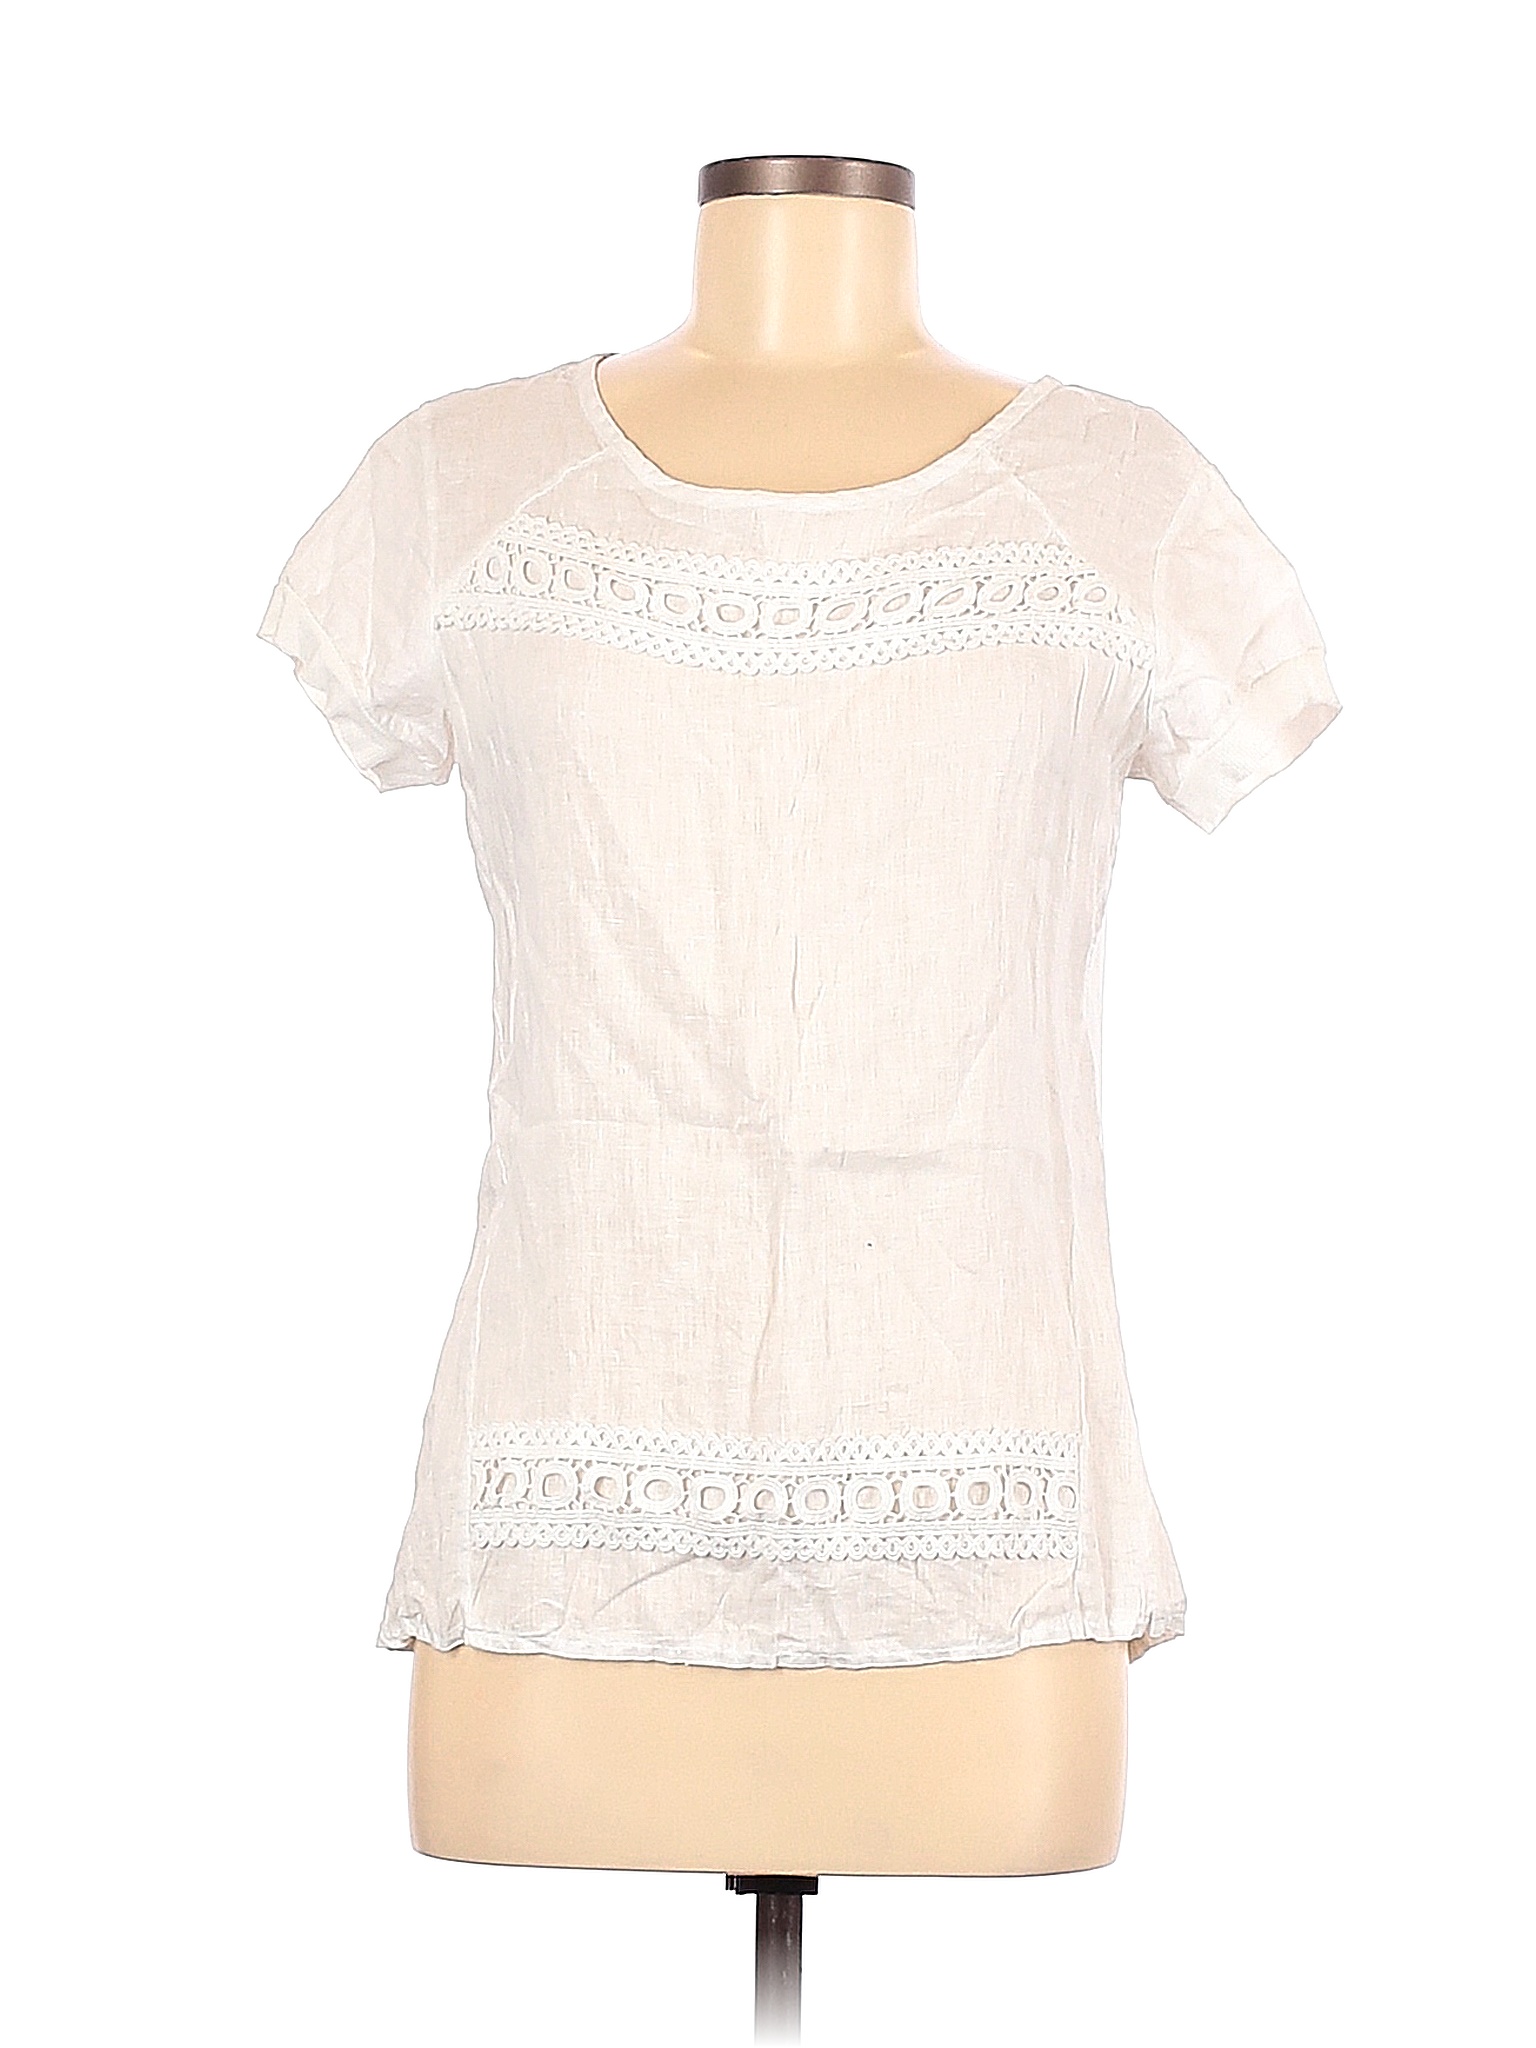 Lungo L'arno 100% Linen Solid White Short Sleeve Blouse Size M - 71% ...